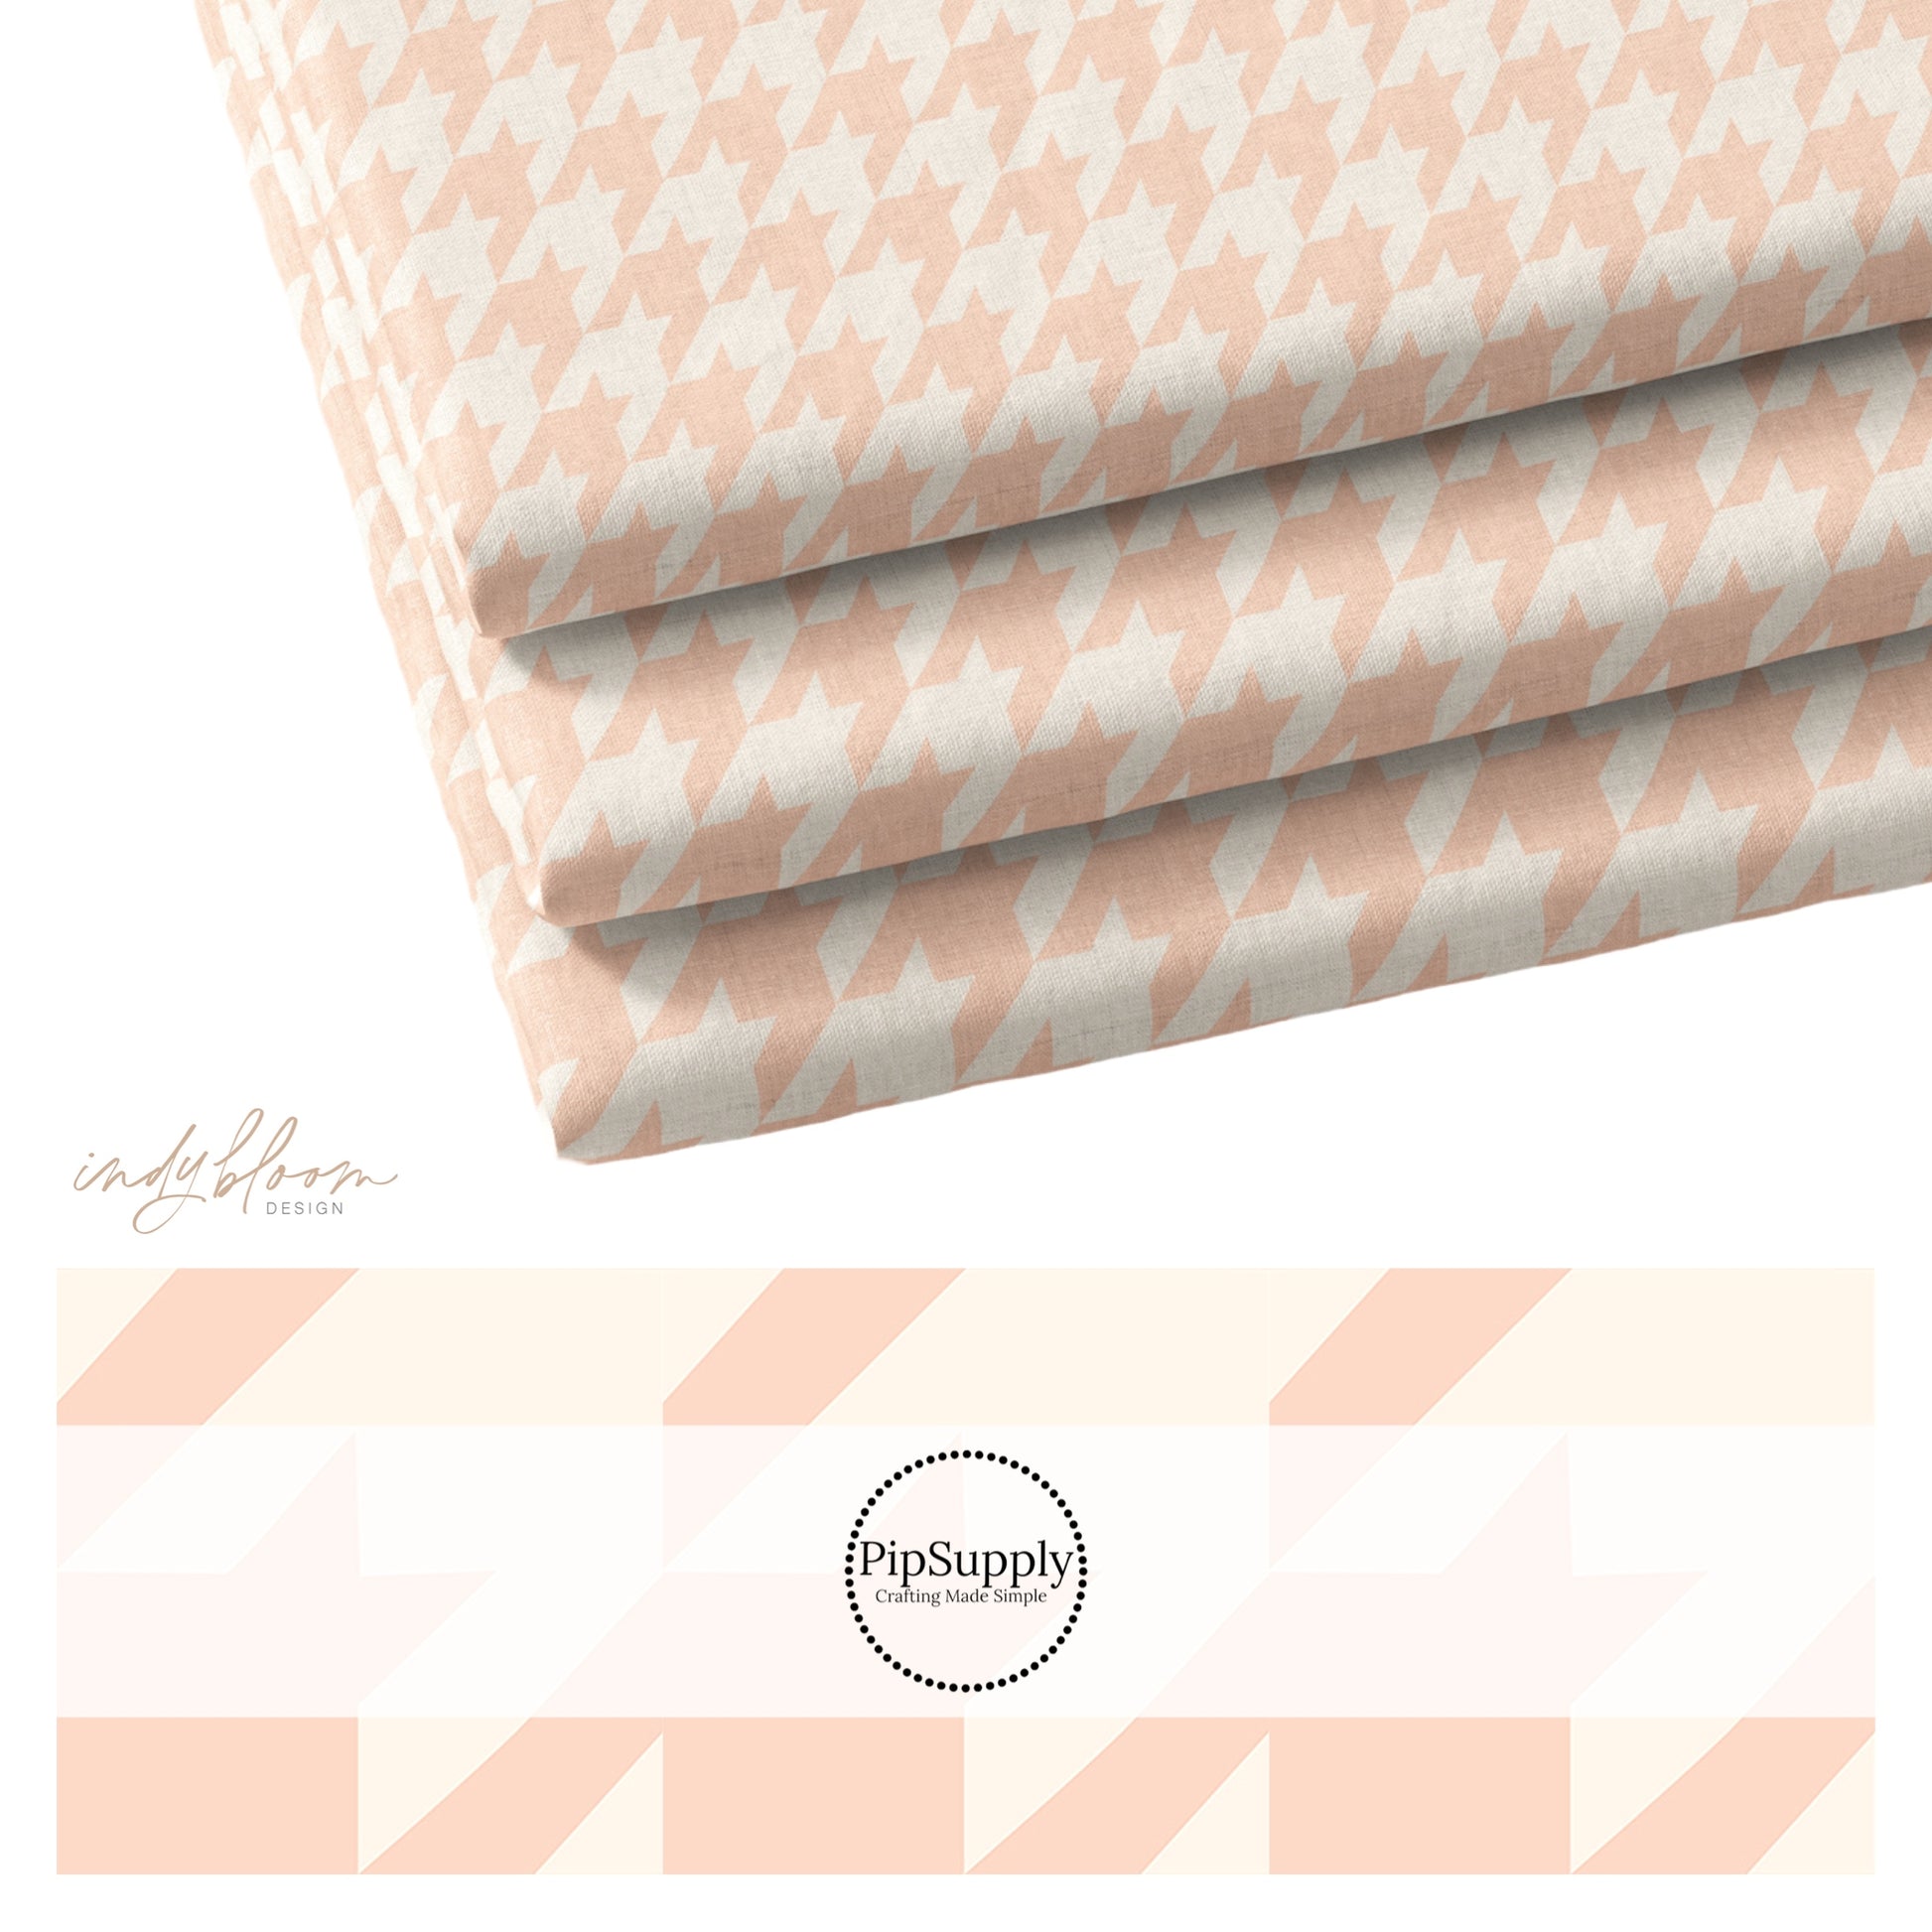 White fabric with pink houndstooth design